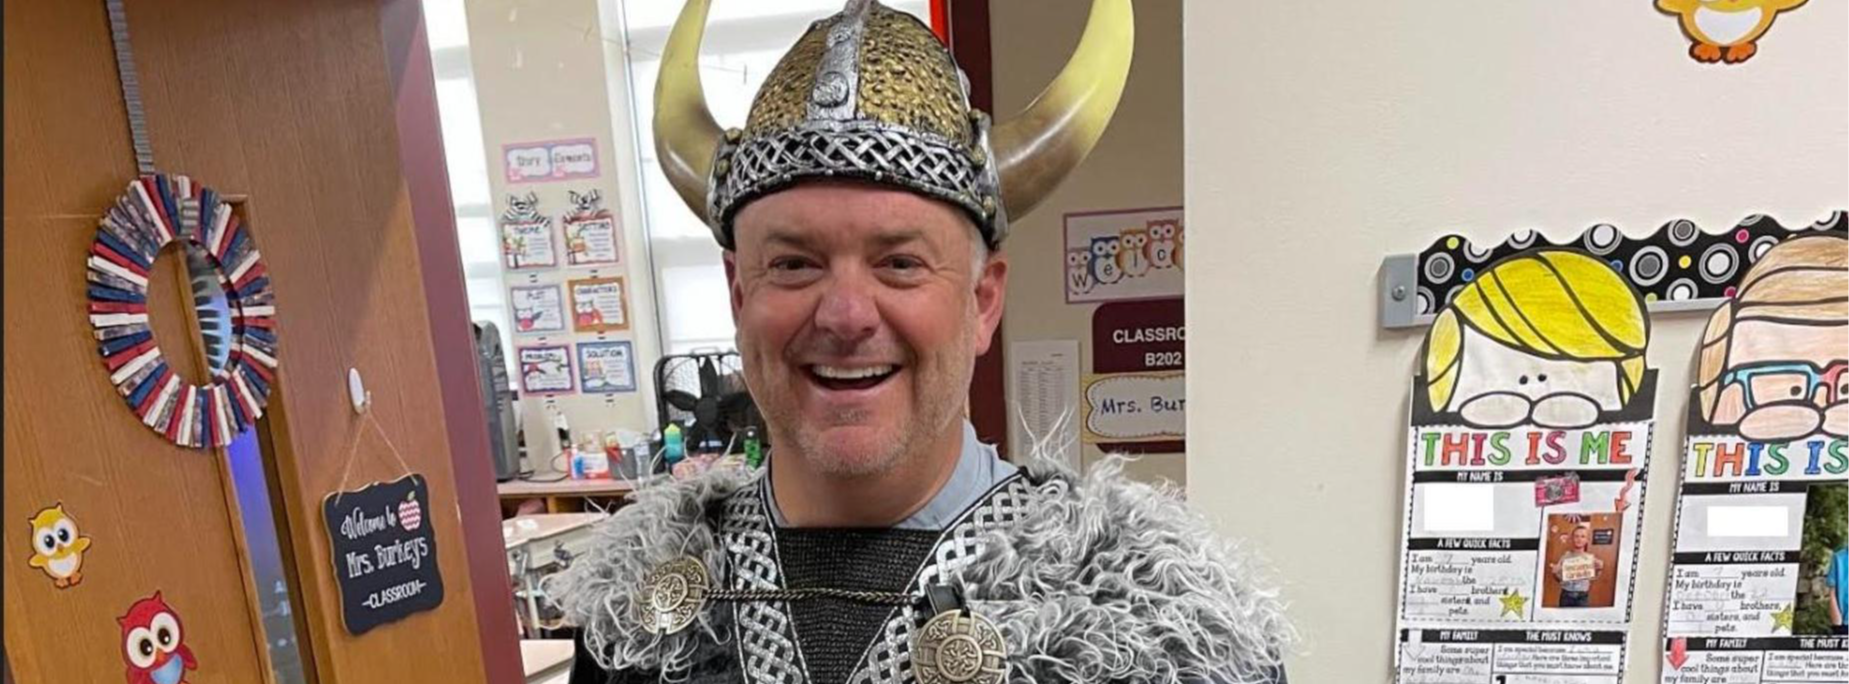 Mr. Bryer dressed as a viking for halloween